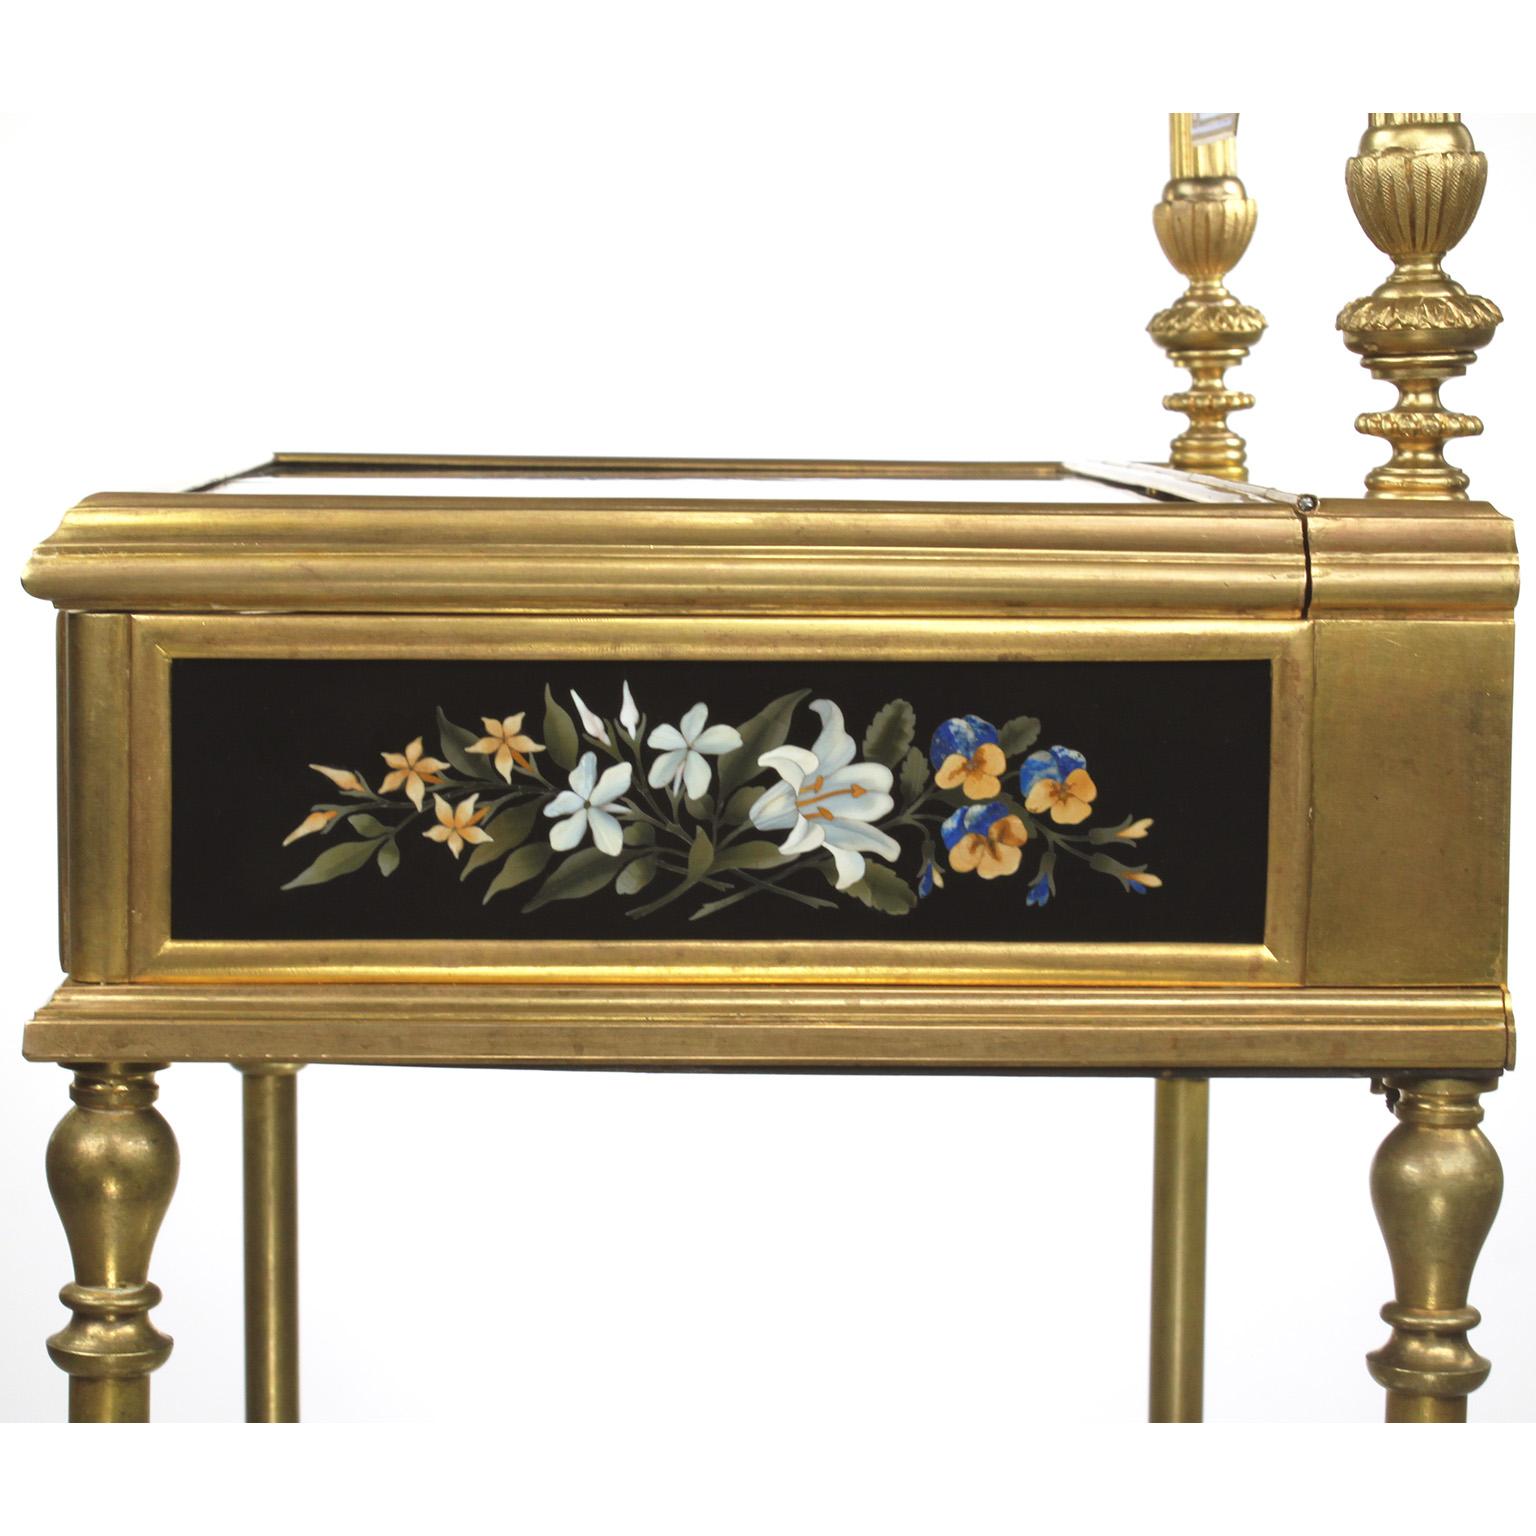 French 19th Century Gilt-Bronze and Pietra Dura Vanity Stand, Attr. Tahan, Paris For Sale 7